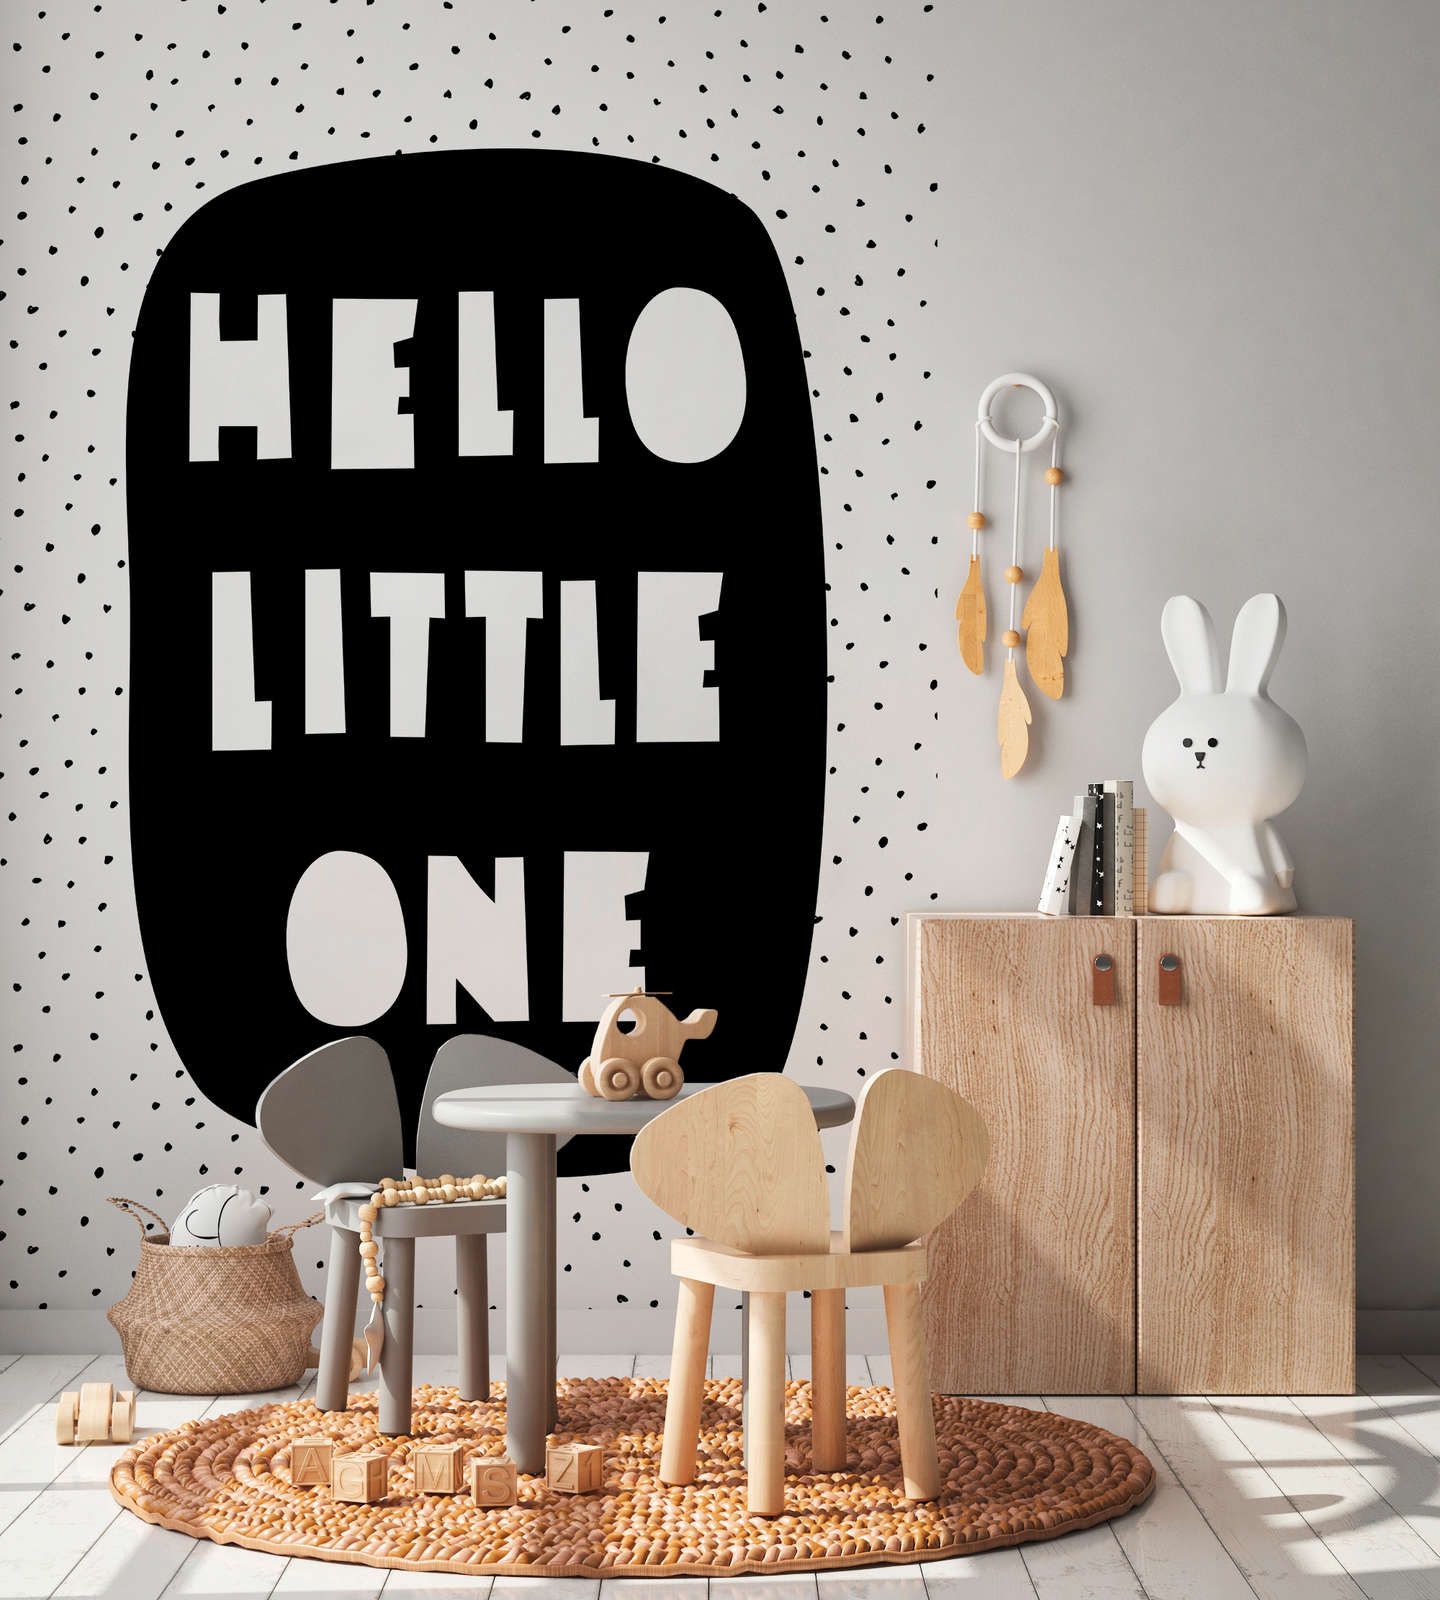             Photo wallpaper for the children's room with "Hello Little One" lettering - Smooth & pearlescent fleece
        